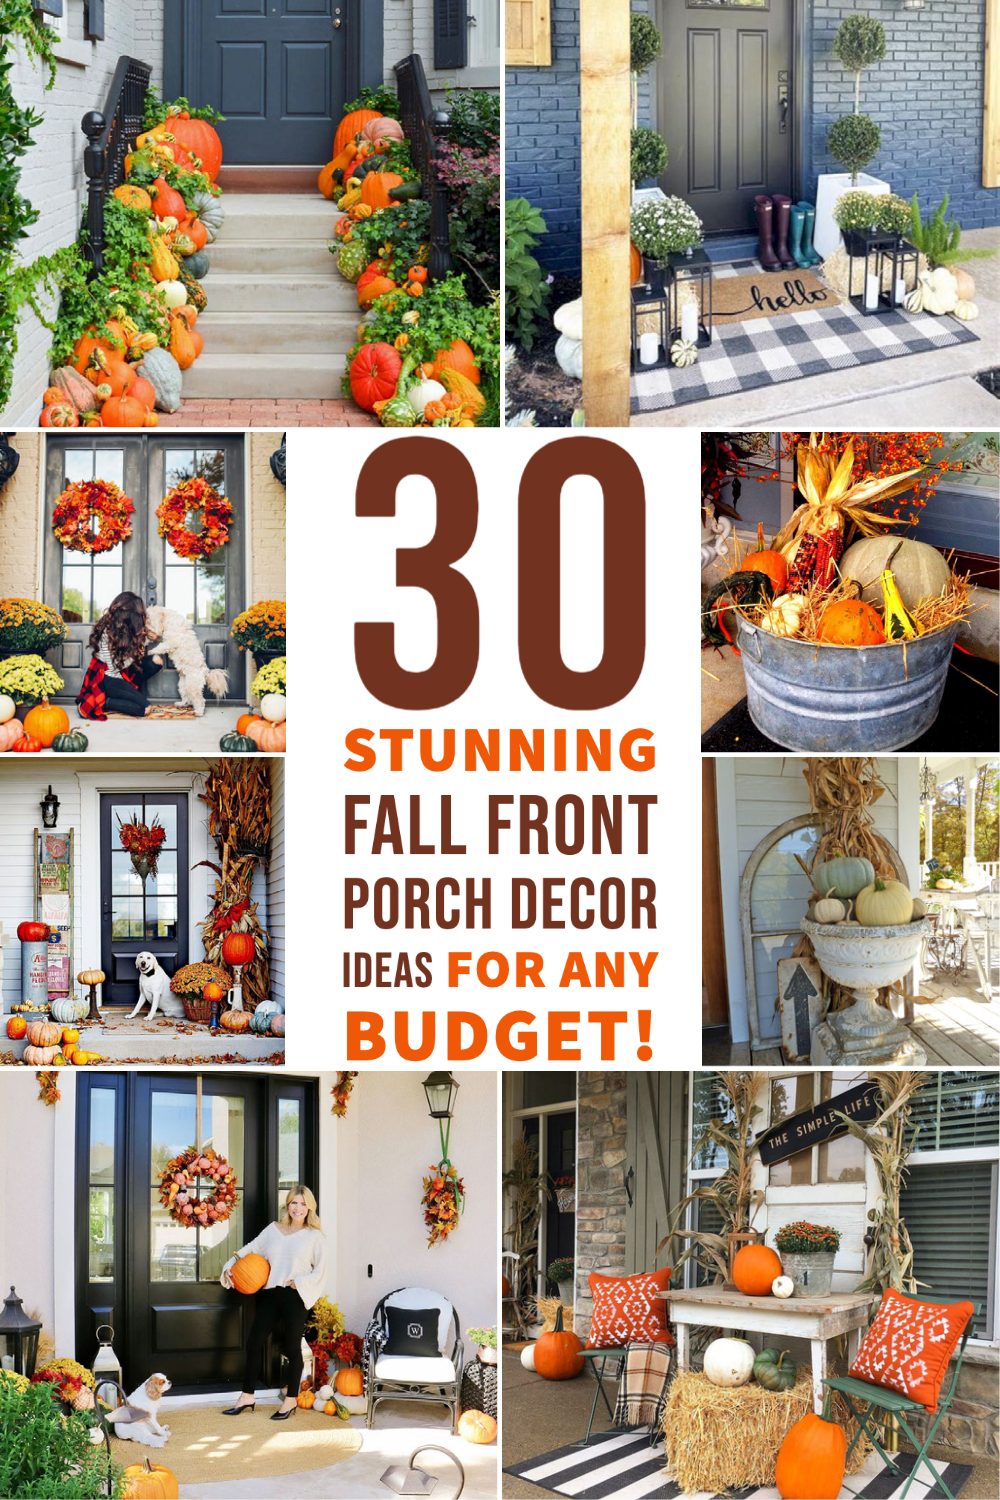 30 Stunning Fall Front Porch Decor Ideas For Any Budget!